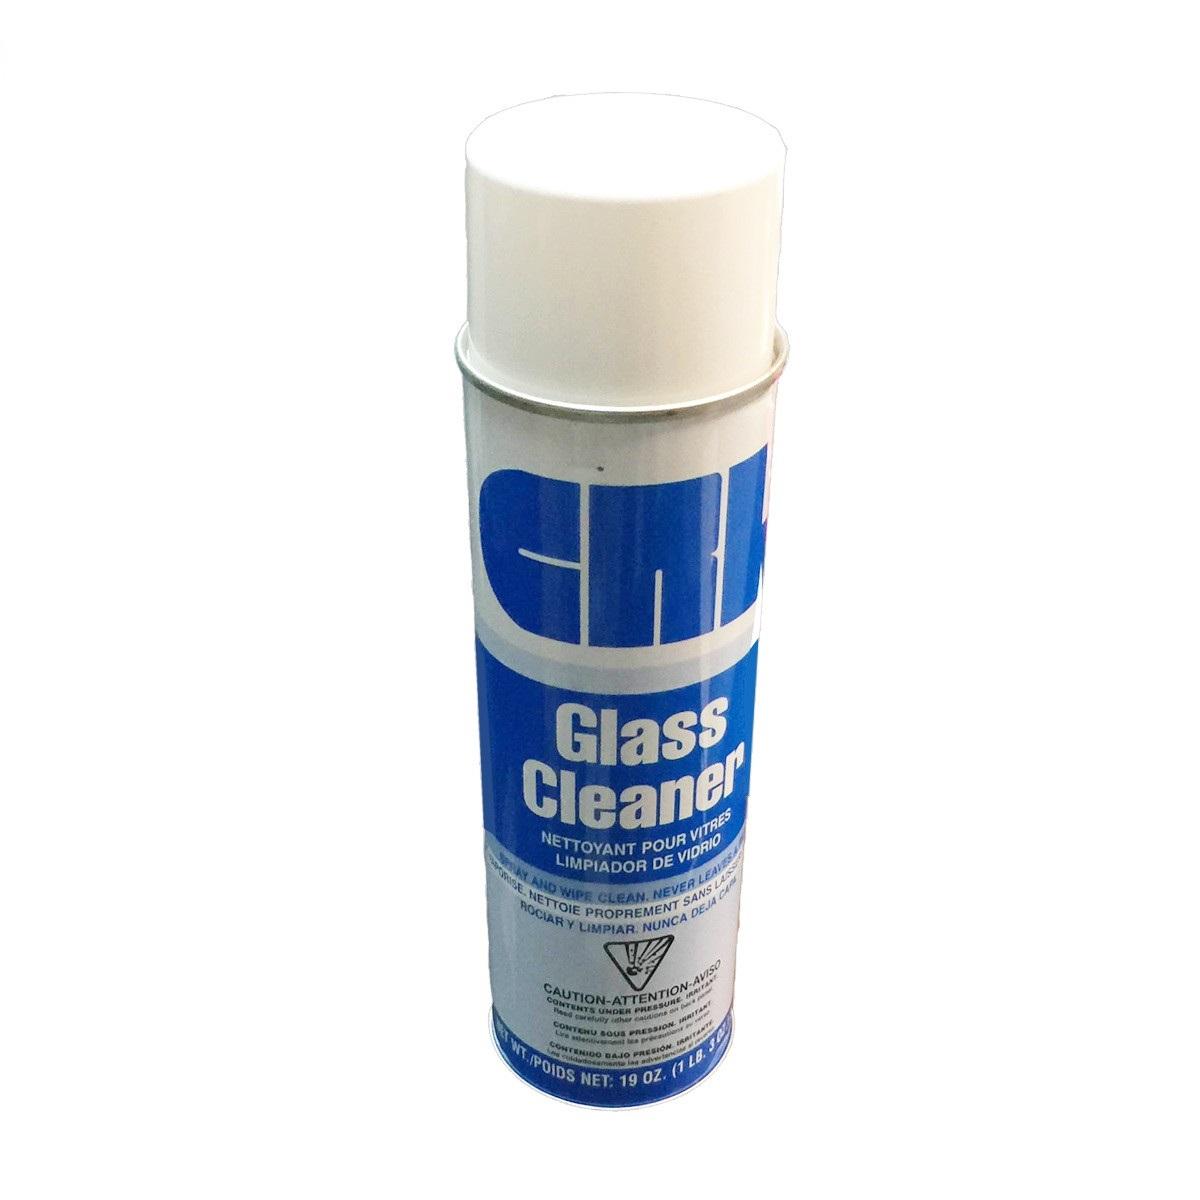 Tips to remove sticky glue from acrylic glass and make it look like brand new